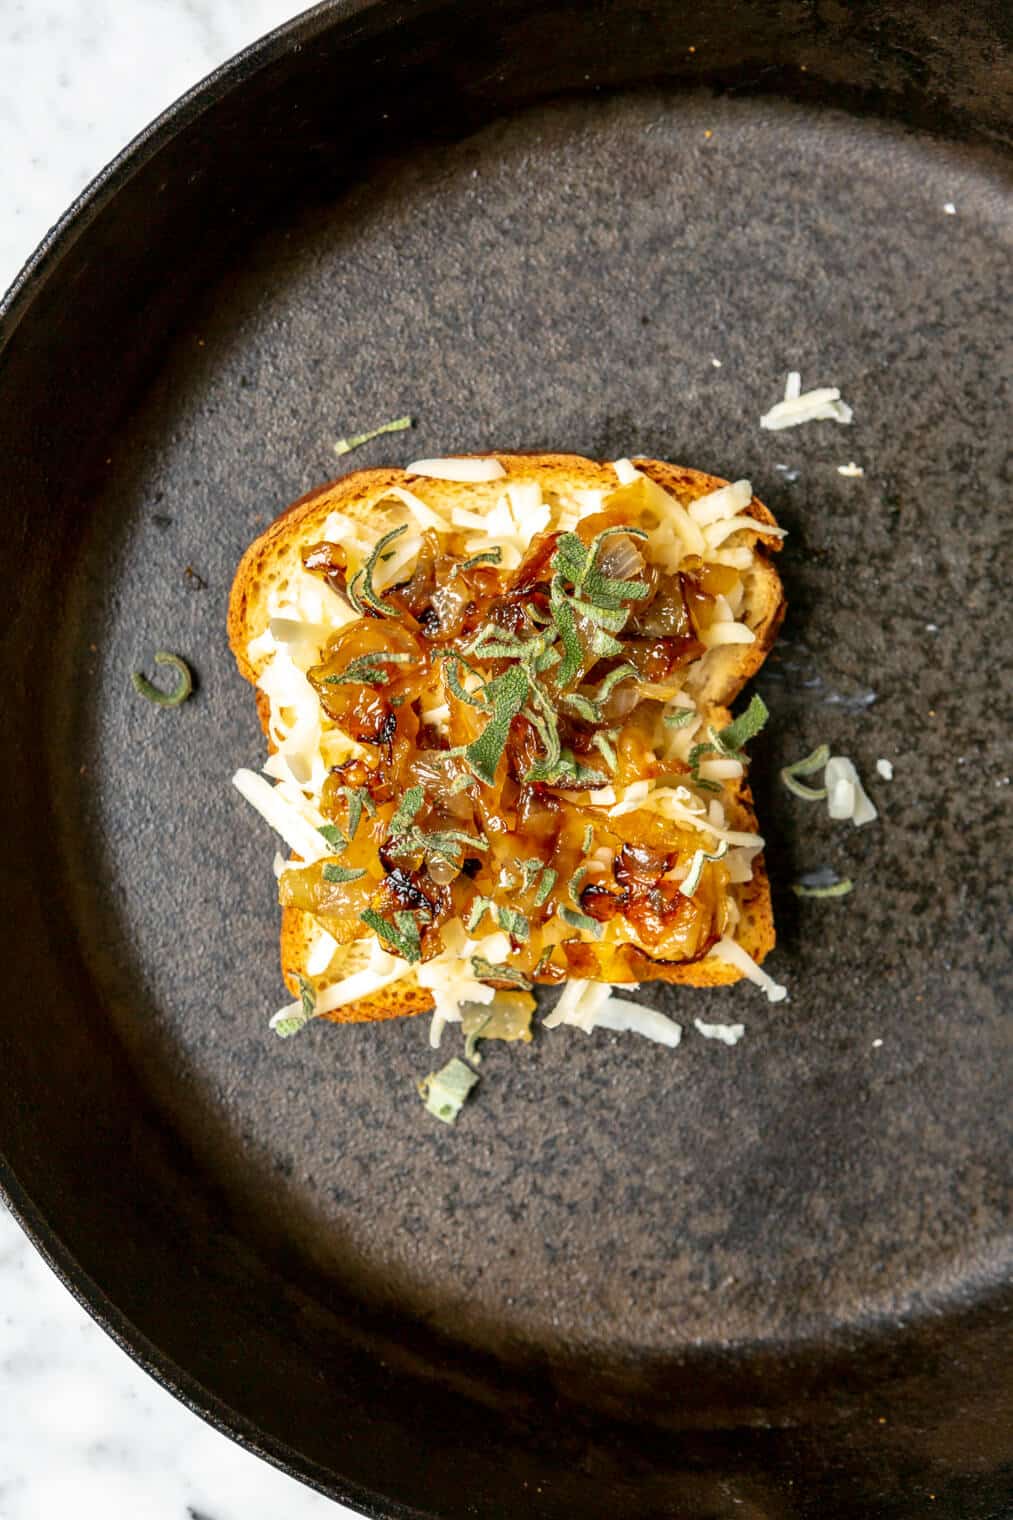 Slice of bread with shredded cheese, caramelized onions, and sage on top in a cast iron skillet.